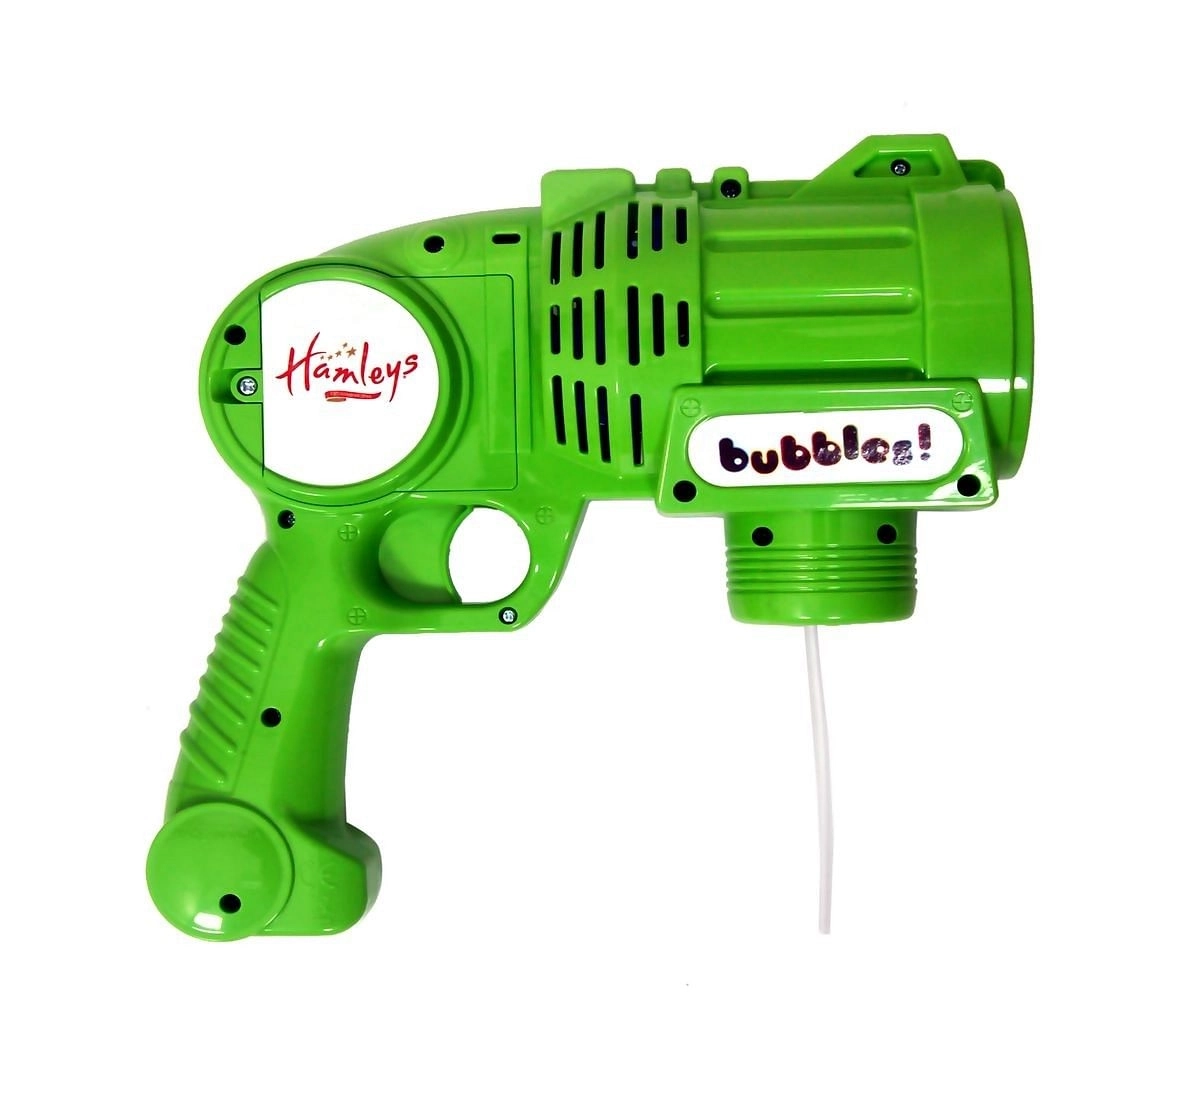 Buy Orange Toy-Guns & Accessories for Toys & Baby Care by Hamleys Online